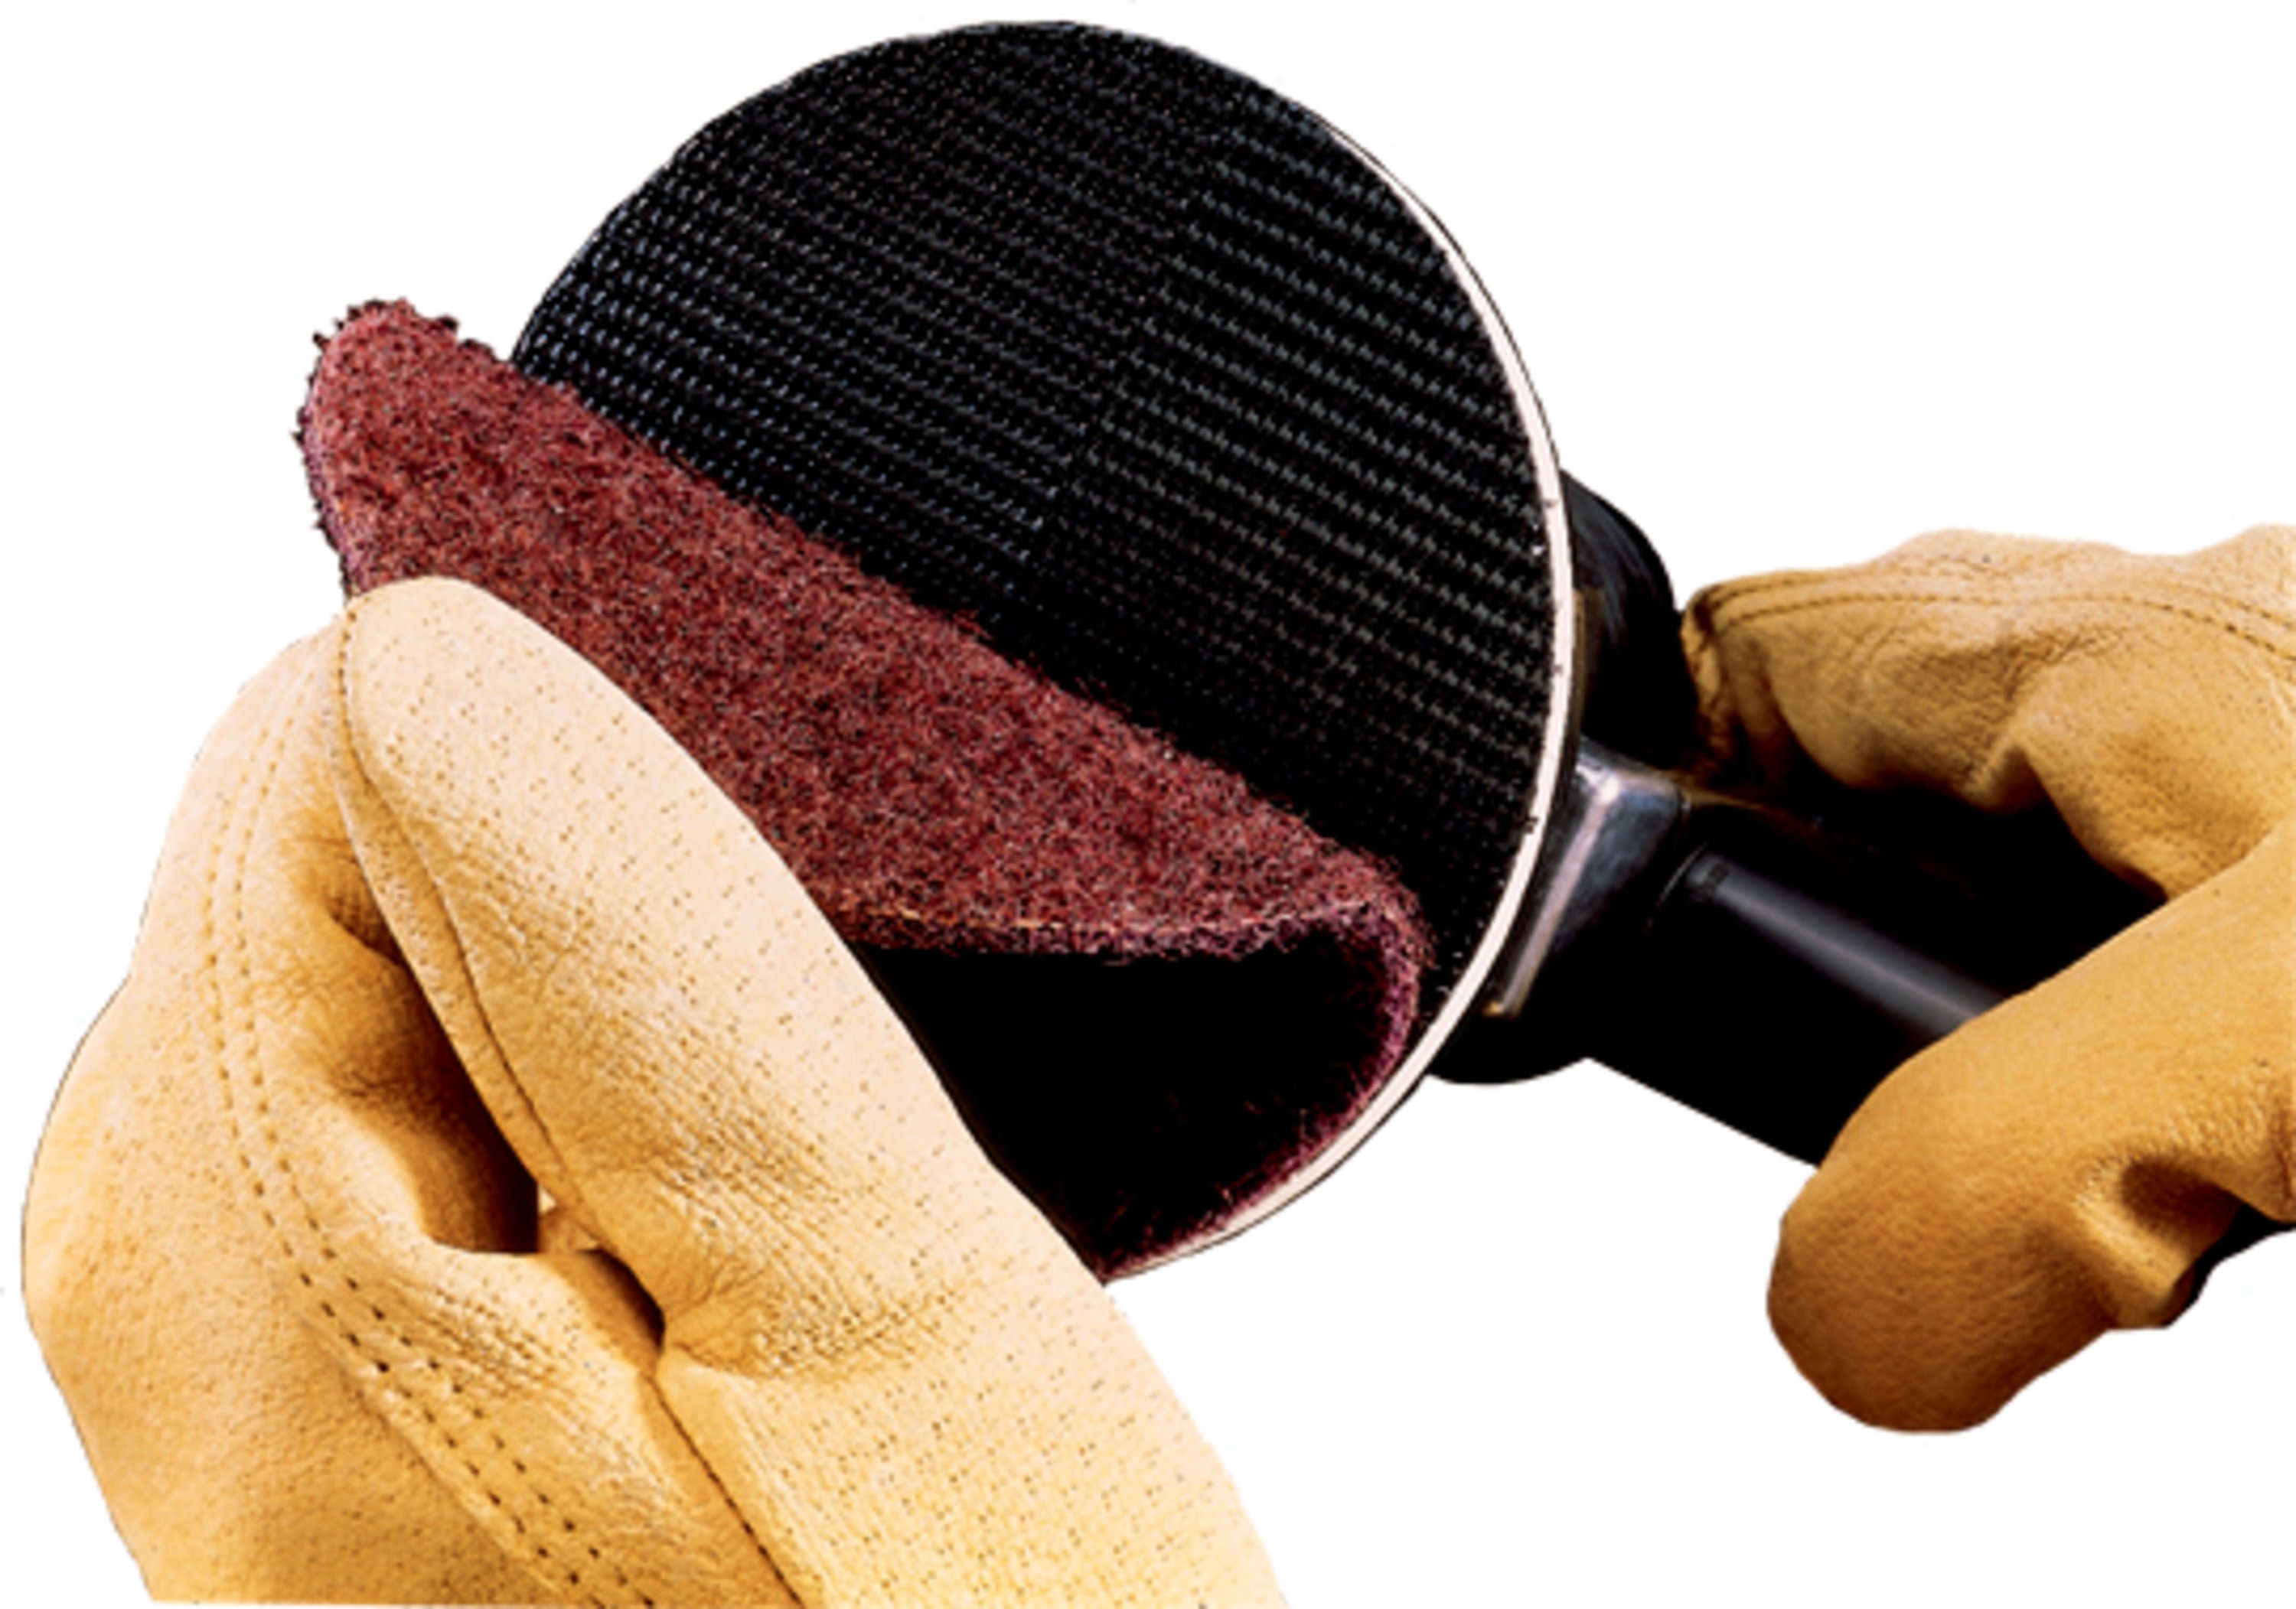 Silicon carbide is another synthetic mineral that is very sharp and commonly used for low-pressure applications, such as sanding and finishing during paint prep.